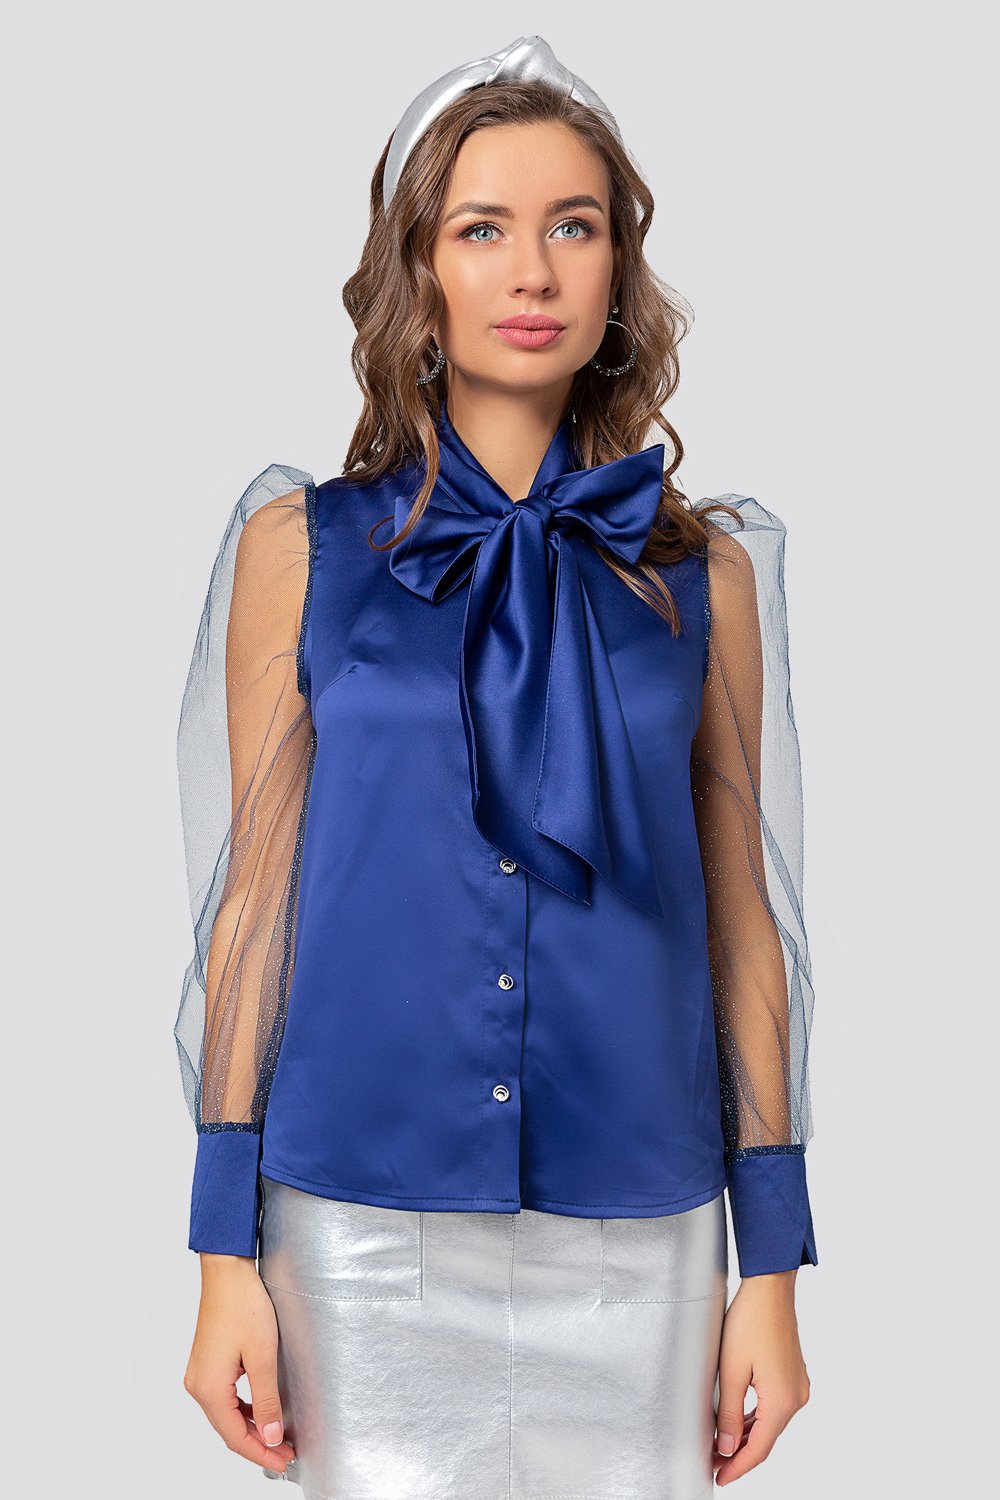 Silk blouse with shiny sleeves